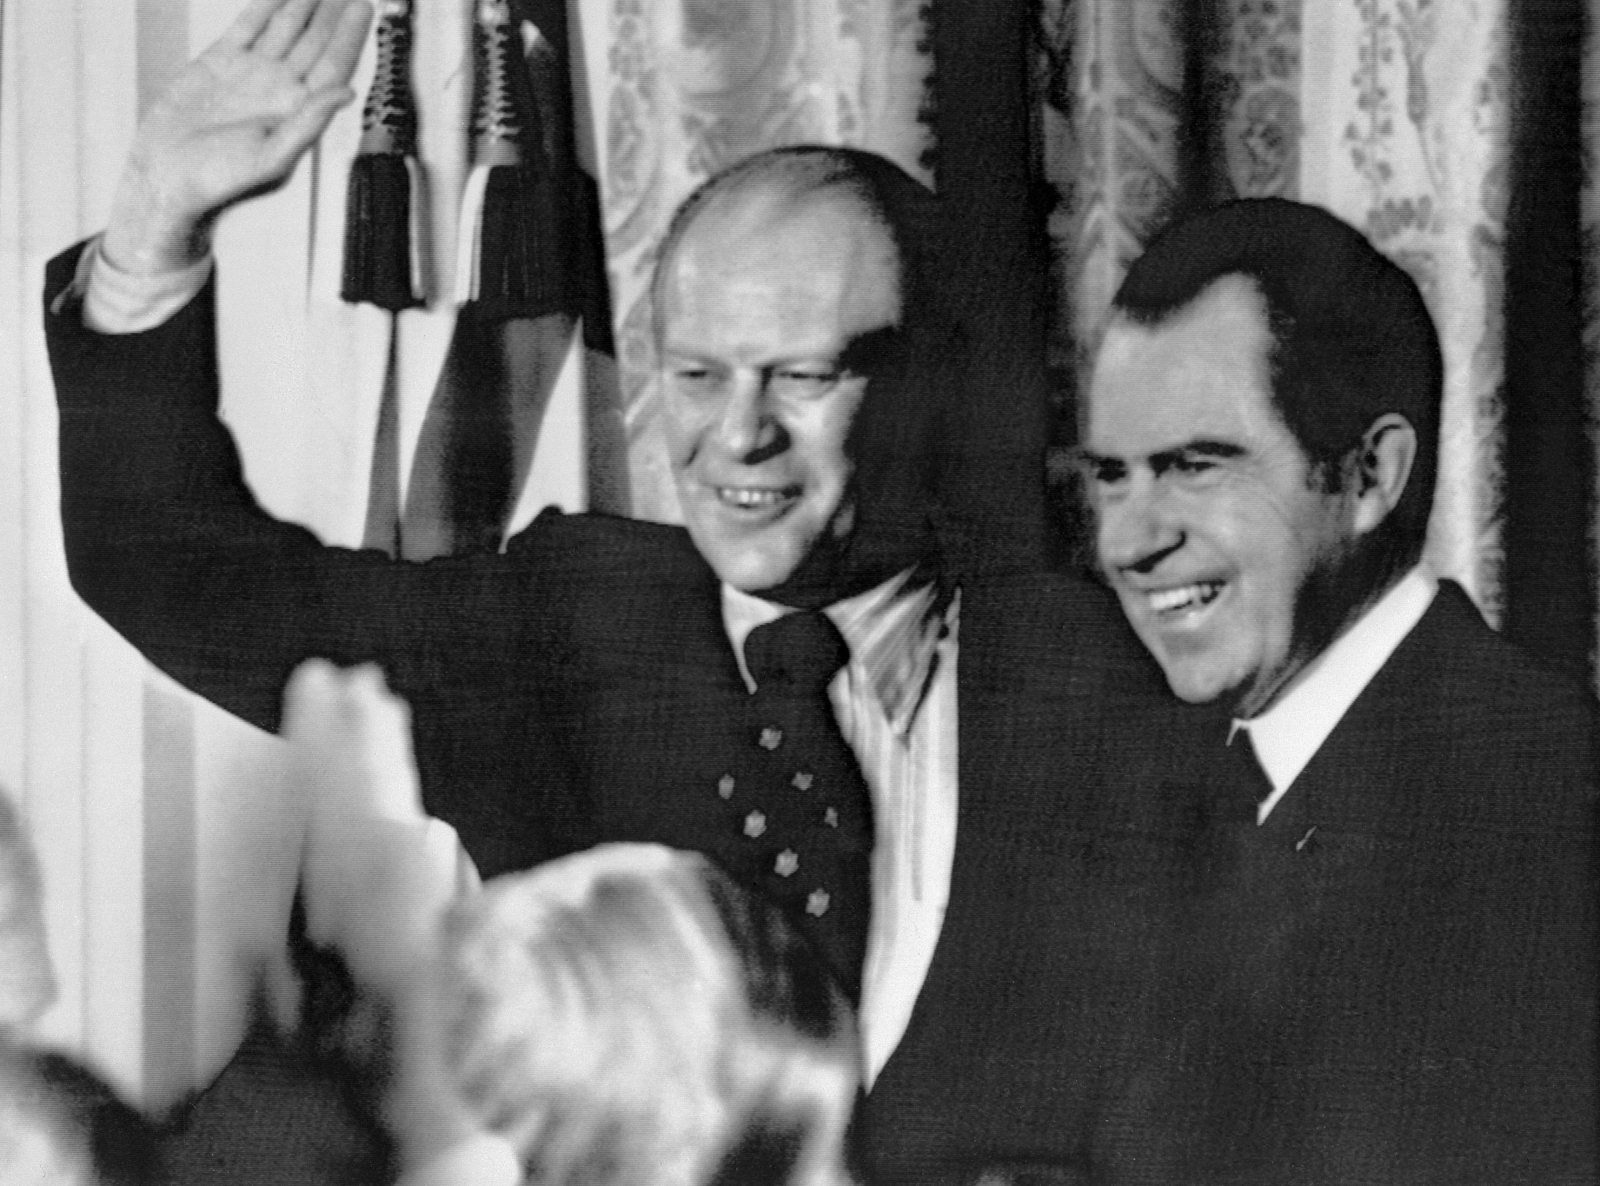 President Richard Nixon and Vice-president Gerald Ford